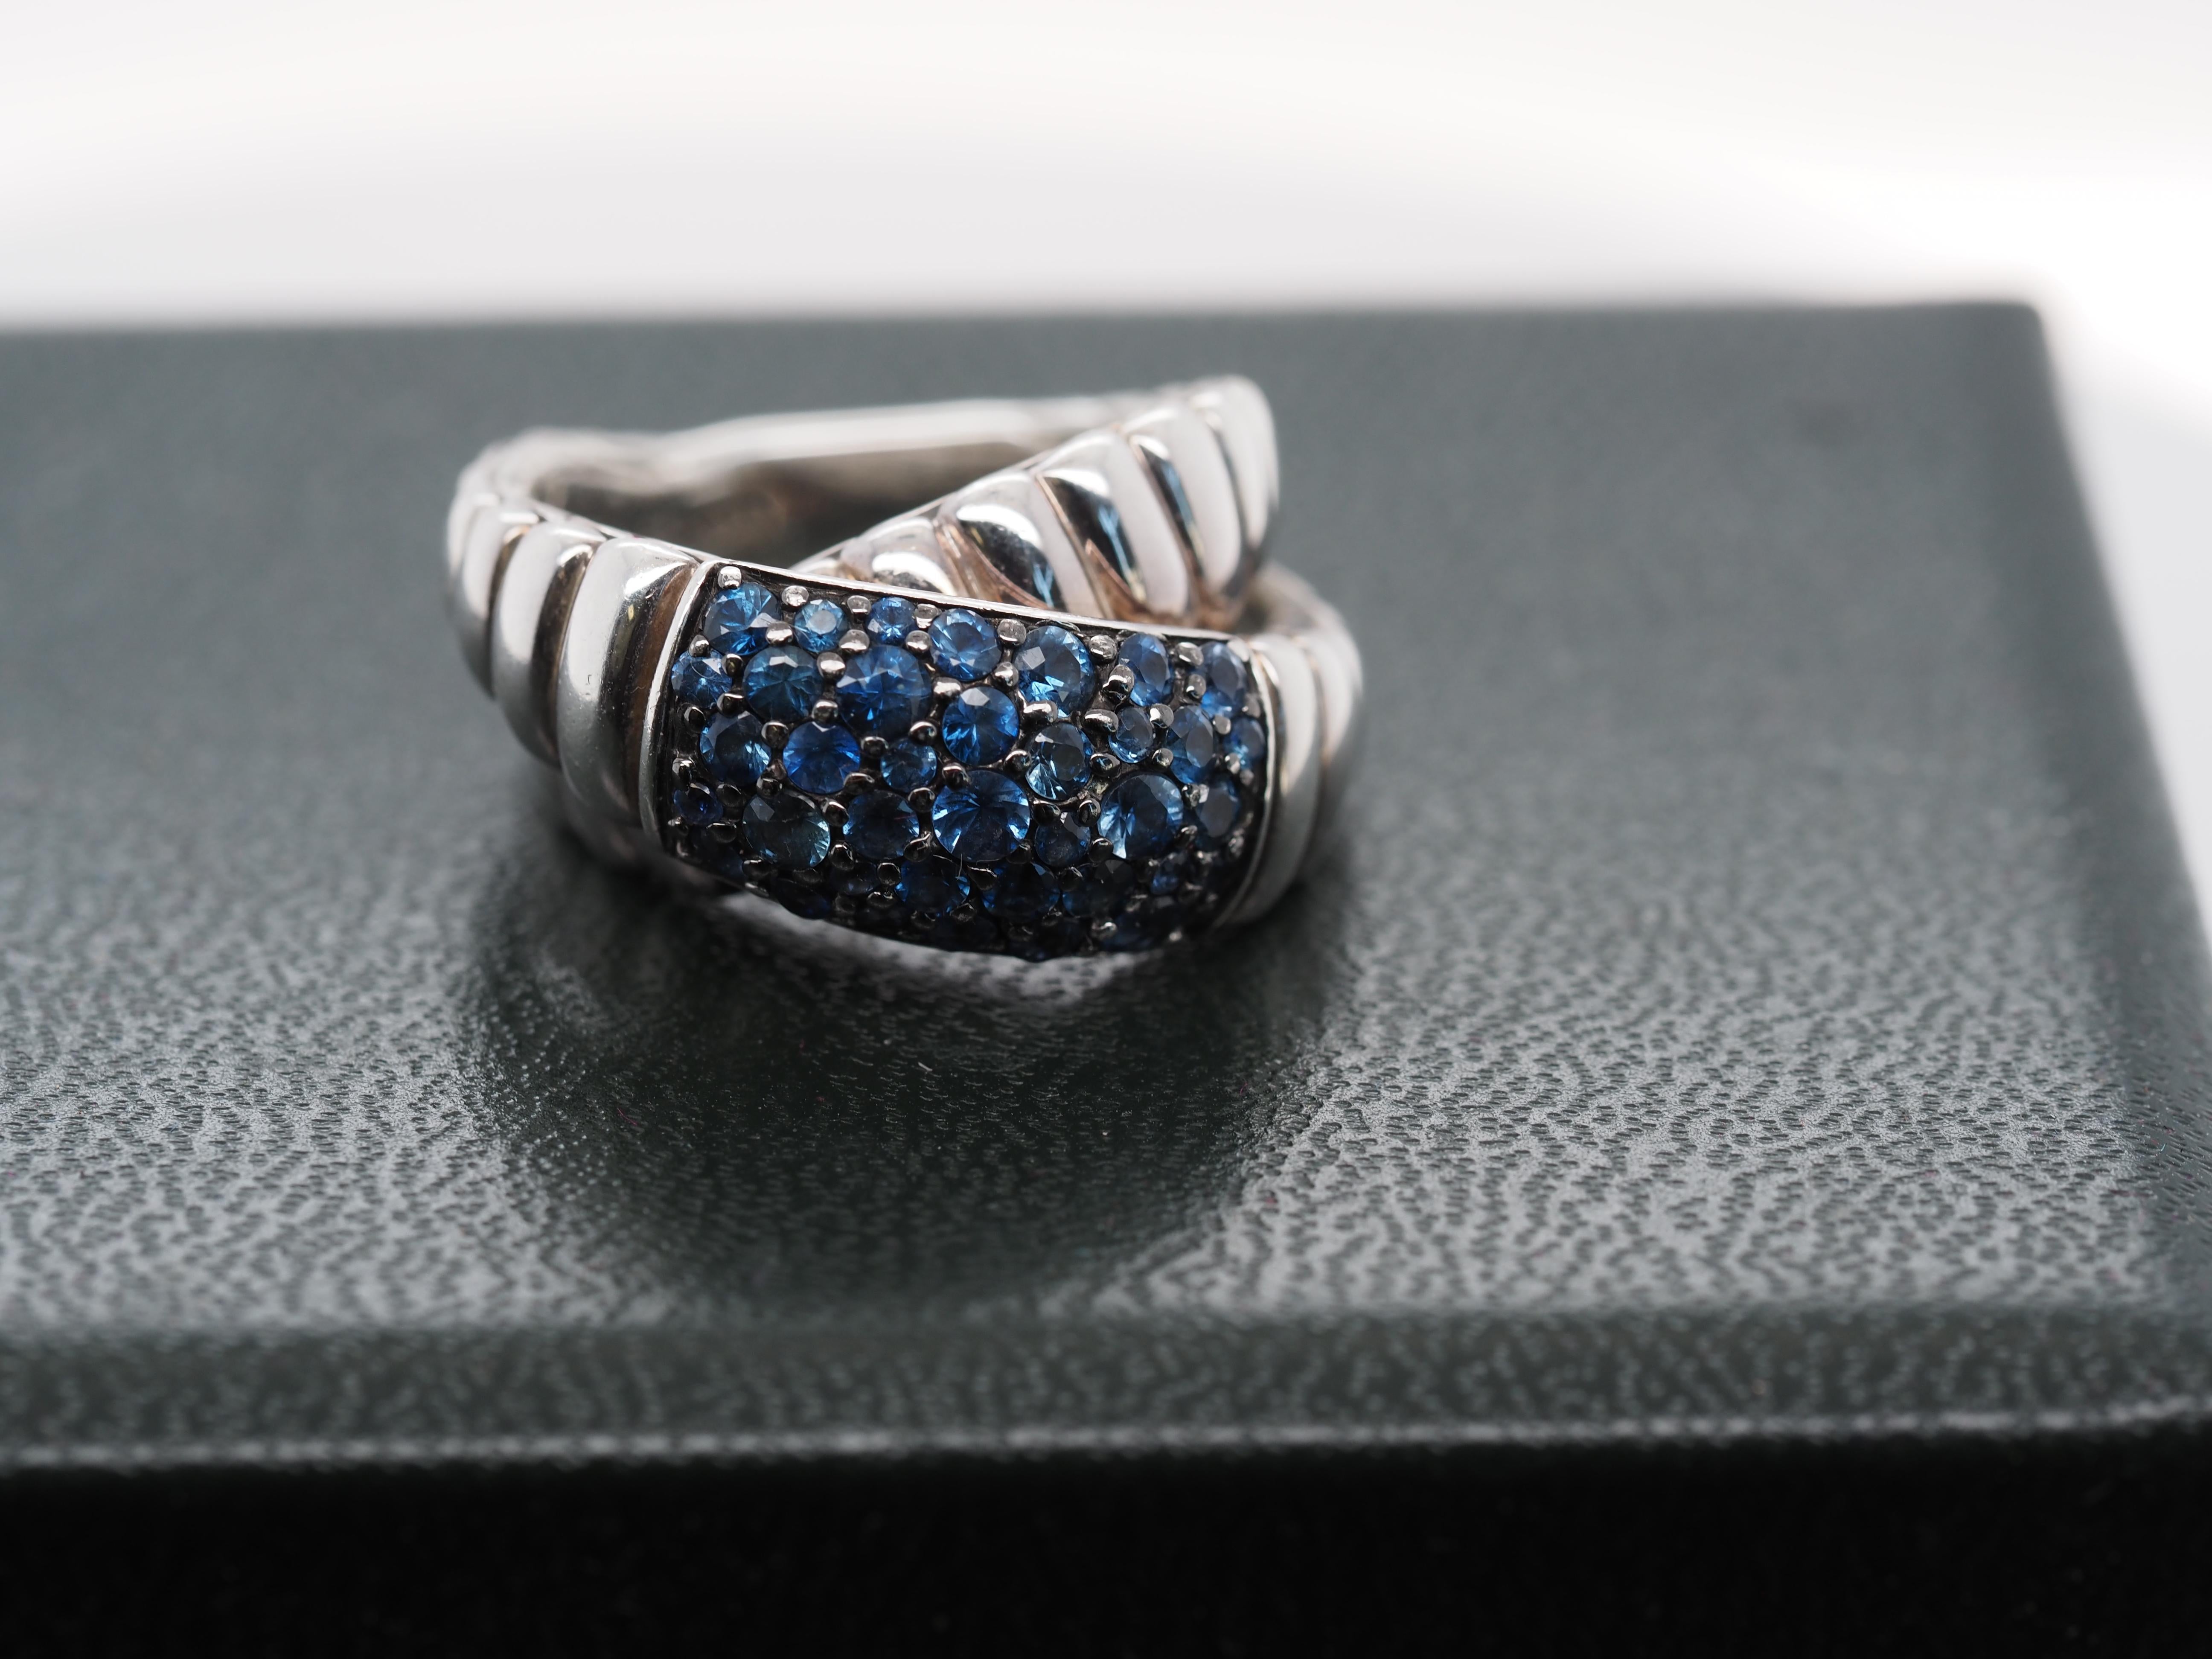 Item Details:
Maker: John Hardy
Ring Size: 7.25
Metal Type: Sterling Silver [Hallmarked, and Tested]
Weight: 11.6 grams
‌
Sapphire Details:
Weight: .90ct, total weight
Cut: Round
Color: Blue
‌
Band Width: 5.0 mm
Condition: Excellent